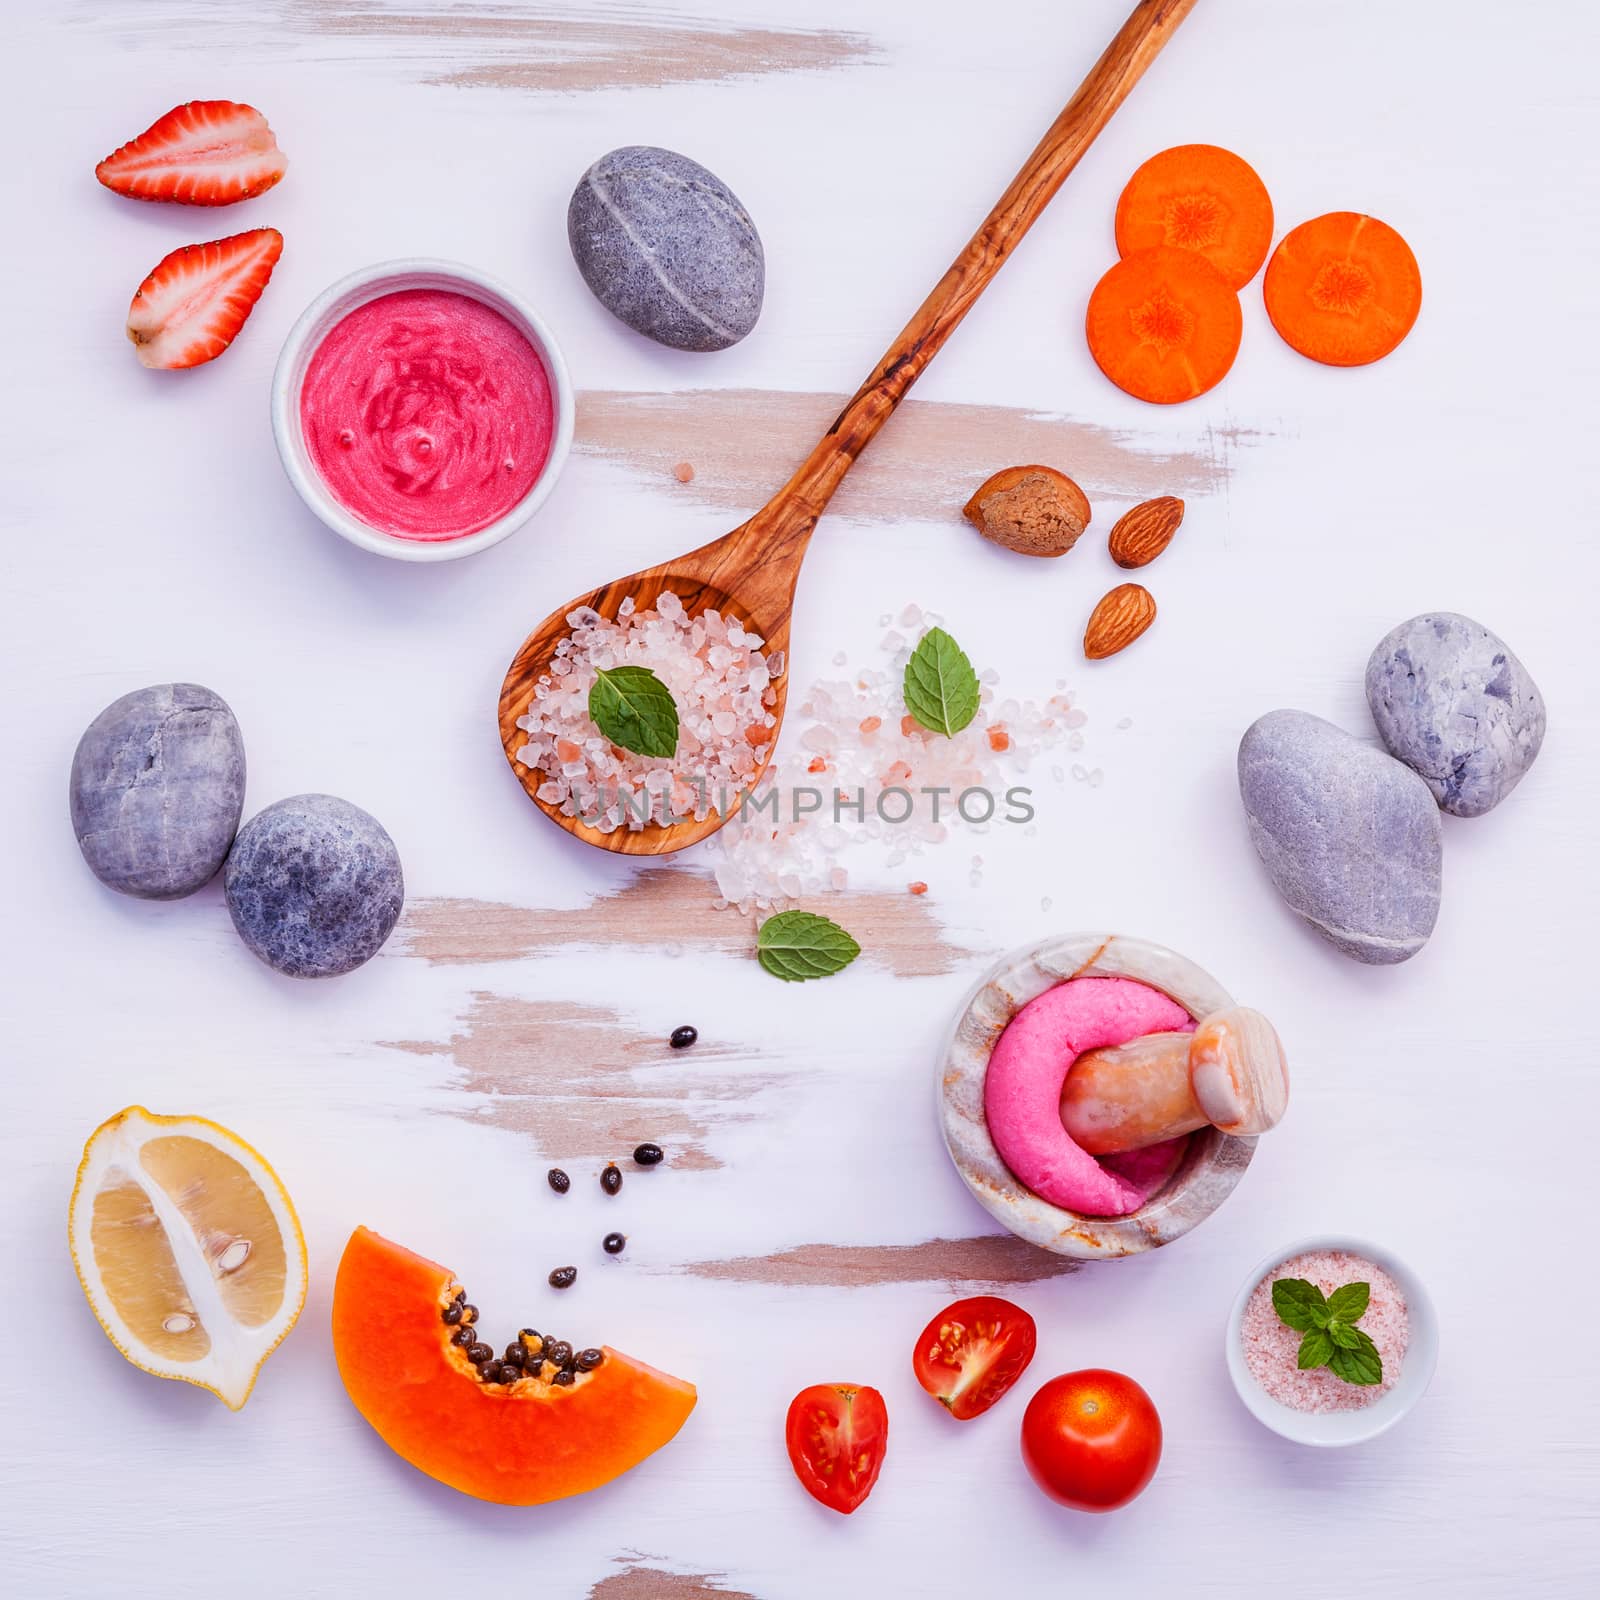 Homemade skin care and body scrubs with red natural ingredients strawberry , tomato ,himalayan salt, ripe papaya, carrot and spa stone setup on white wooden background with flat lay. Zen spa and oriental spa theme.